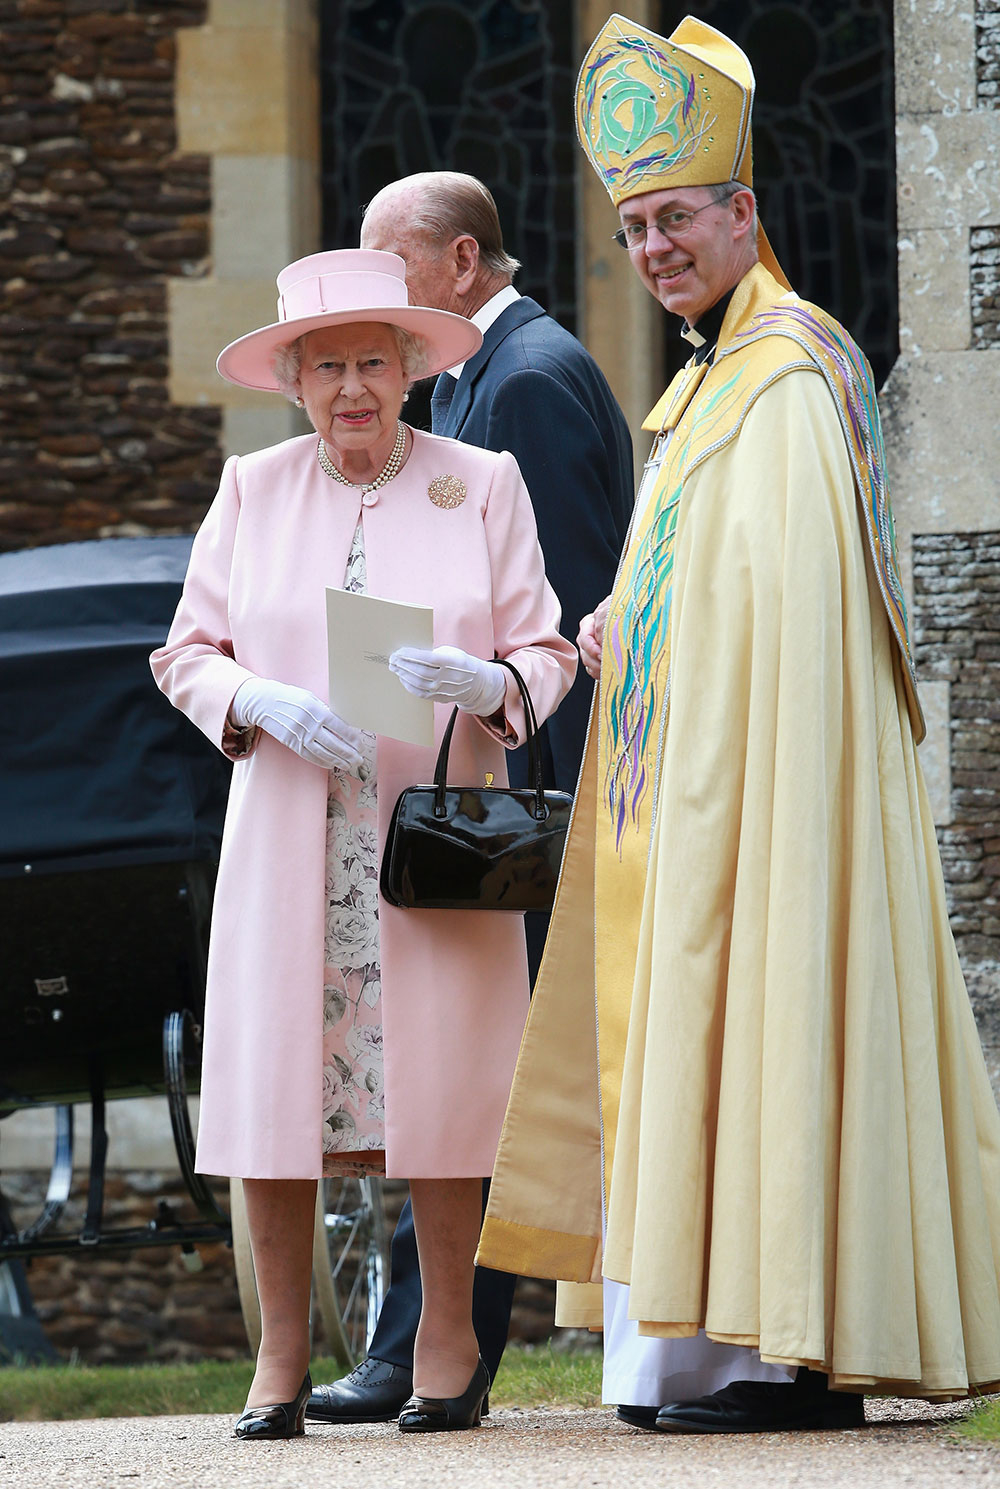 Her Majesty, Queen Elizabeth II wears a pale pink jacquard wool coat worn over a floral silk dress with a matching pale pink hat and her signature patent leather black purse and heels.